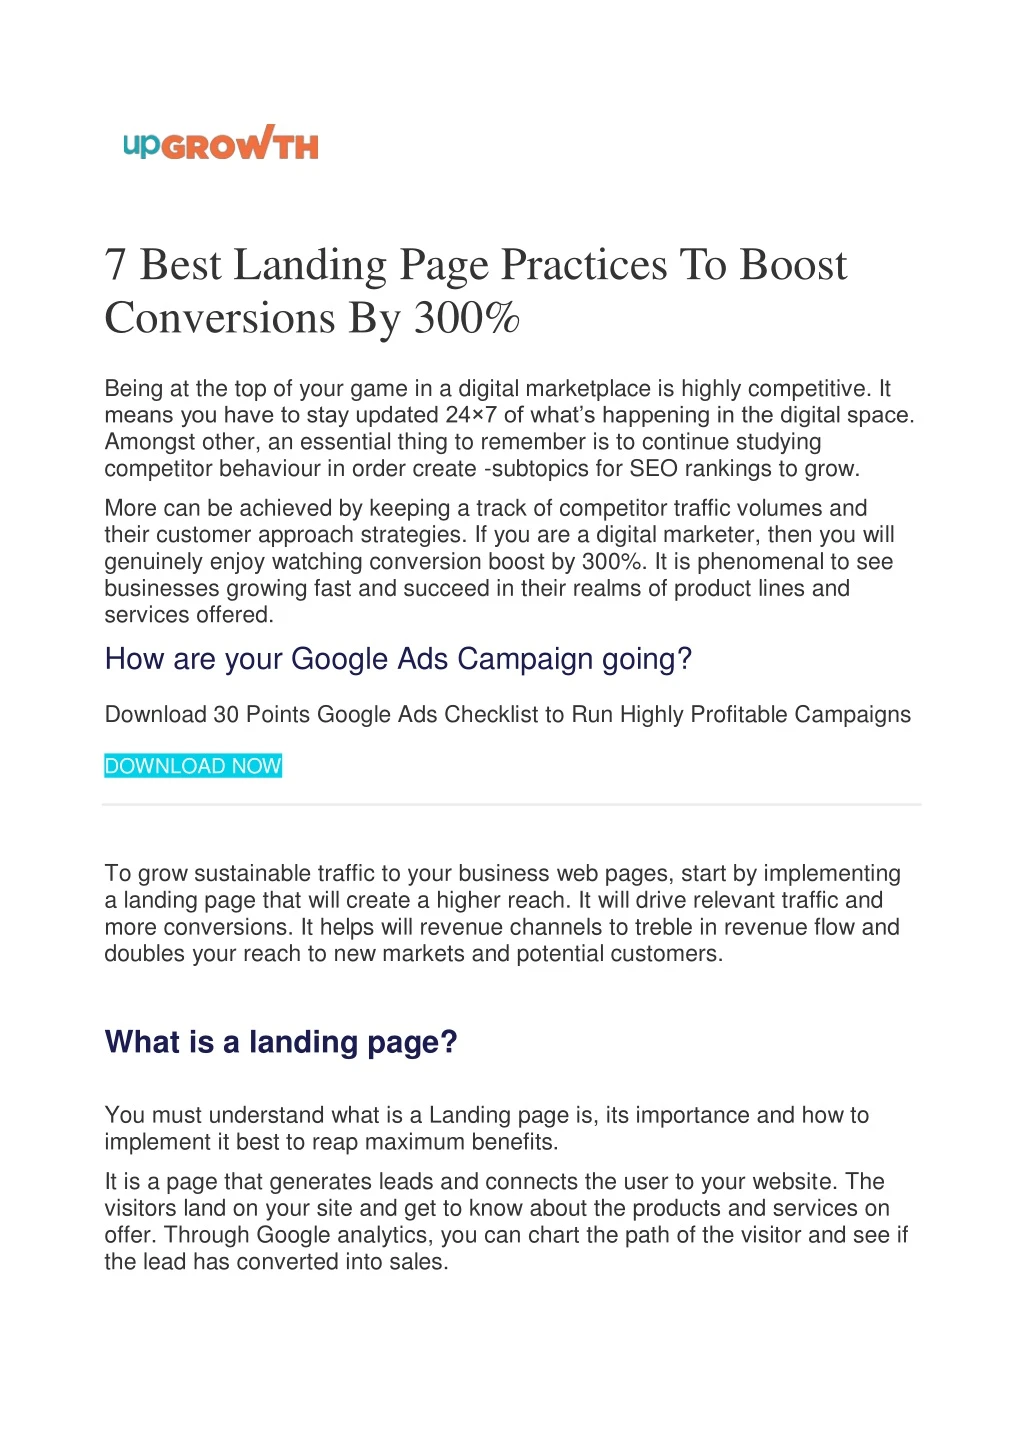 7 best landing page practices to boost